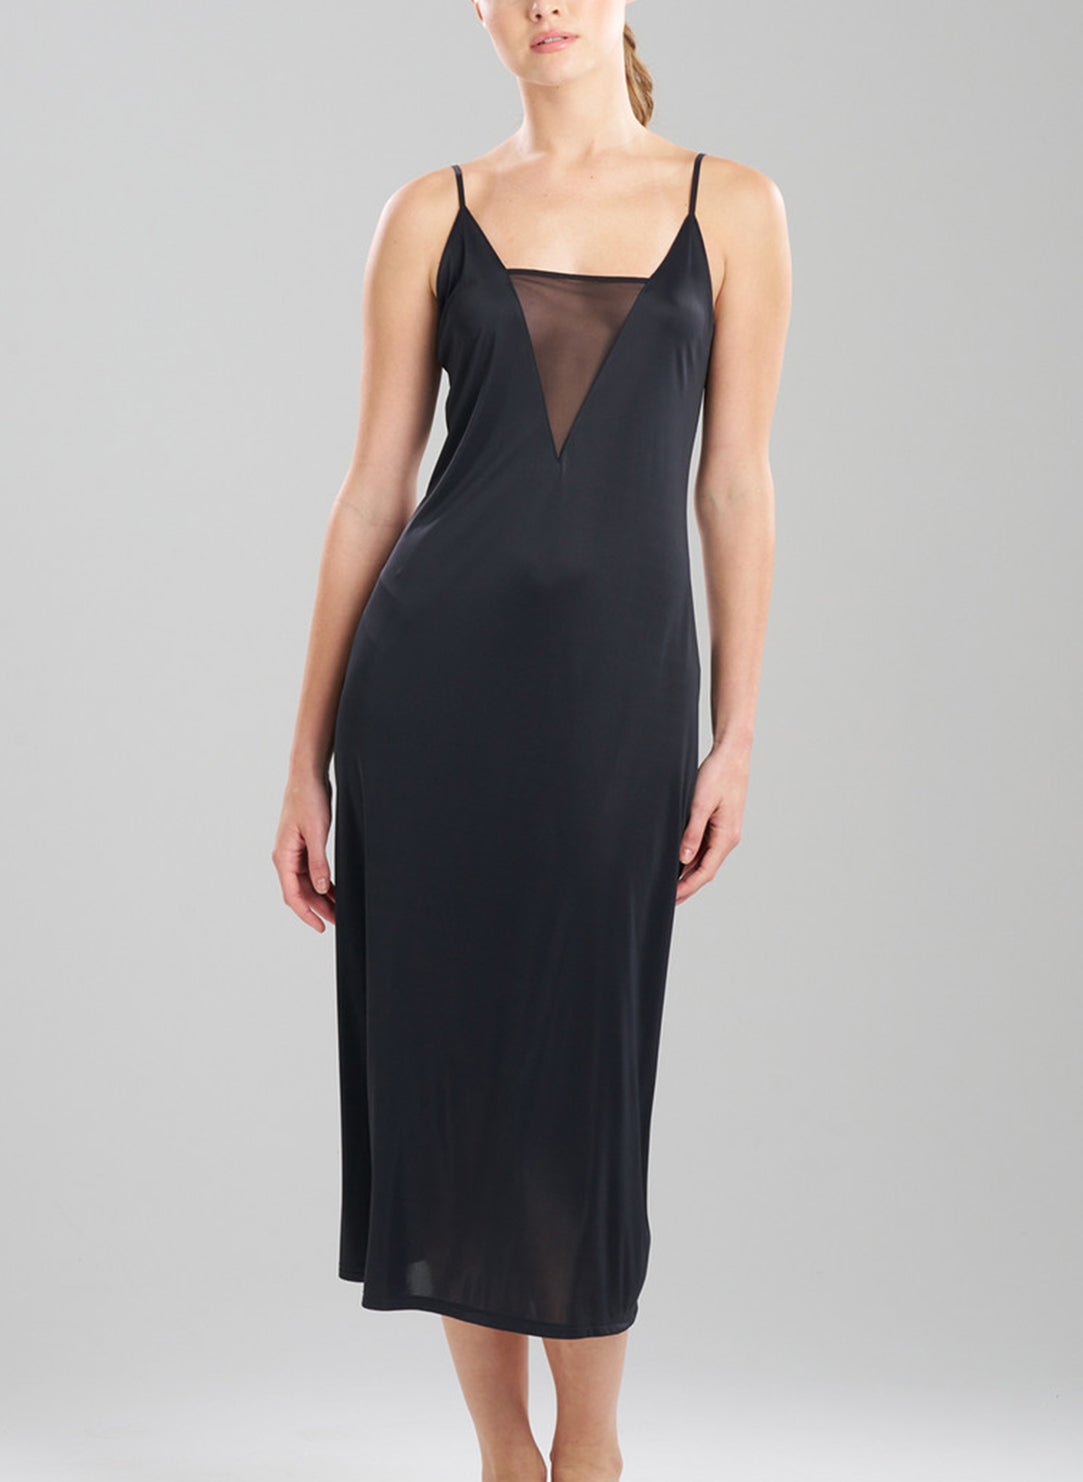 Body Doubles Black-BLK Gown with Mesh